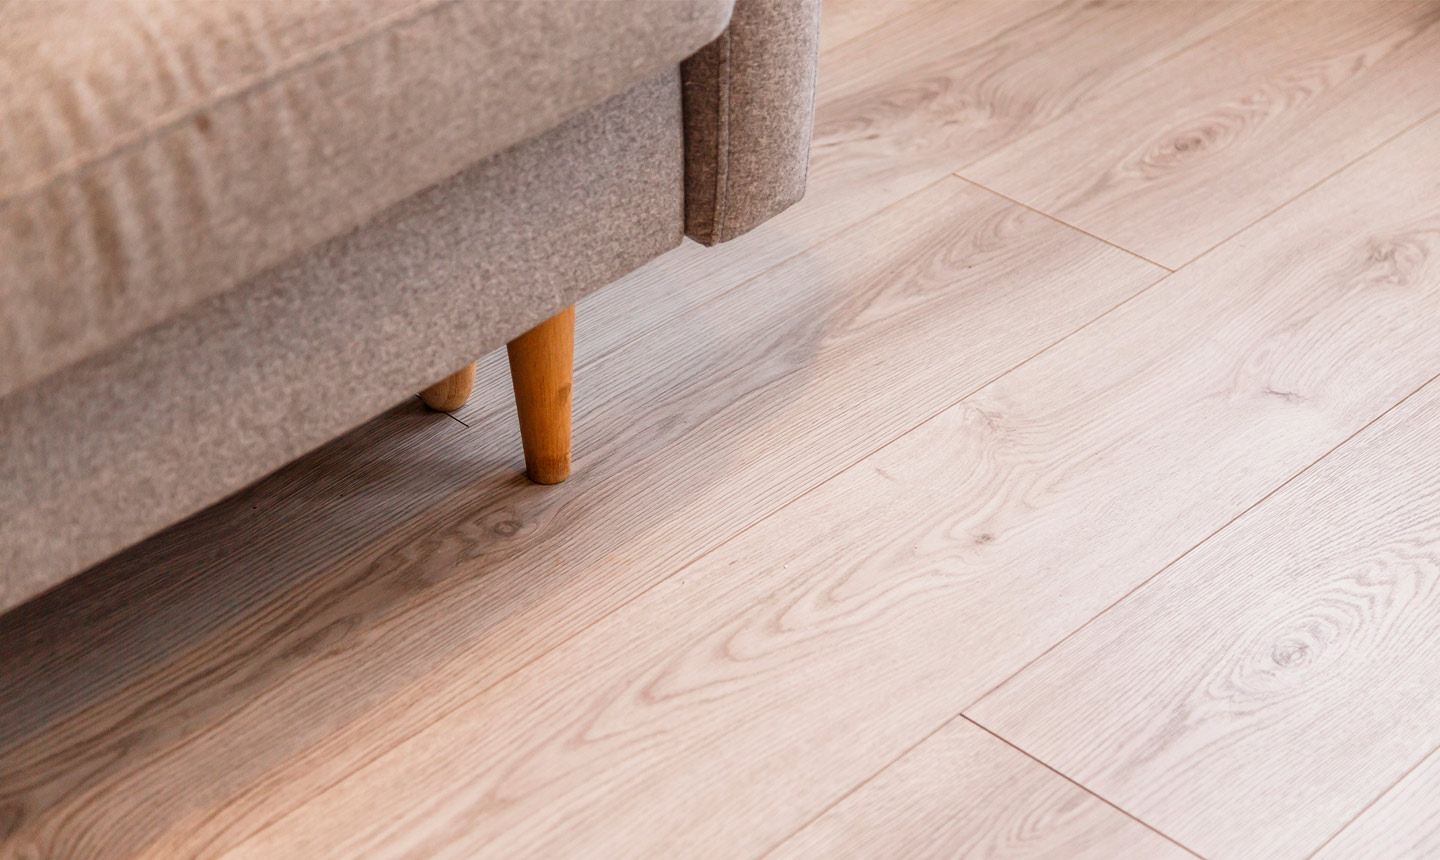 Useful tips to eliminate scratches on wooden floors